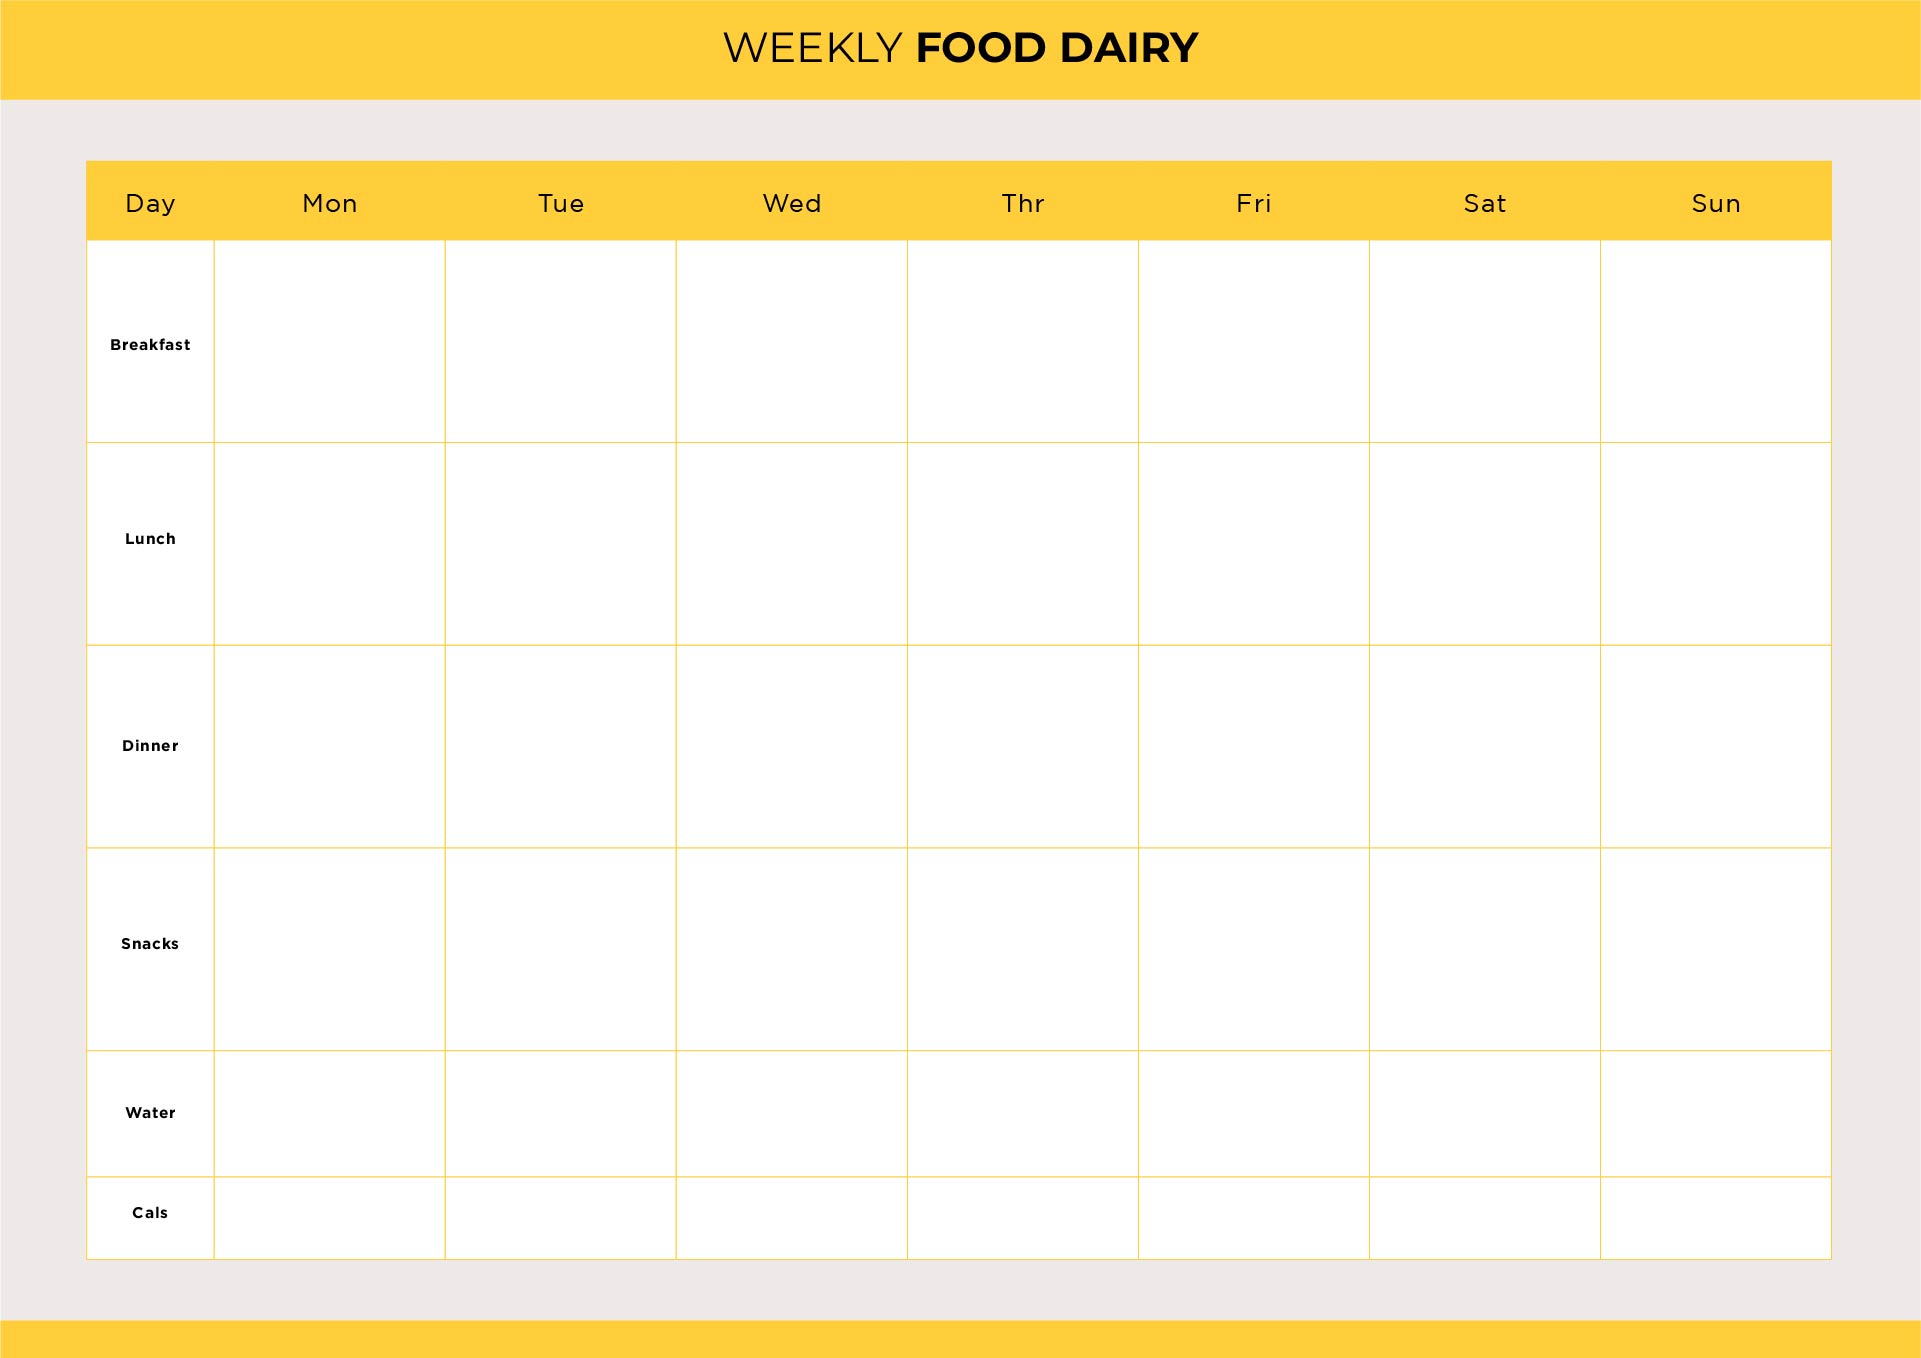 free-printable-meal-planner-set-the-cottage-market-fad-weekly-meal